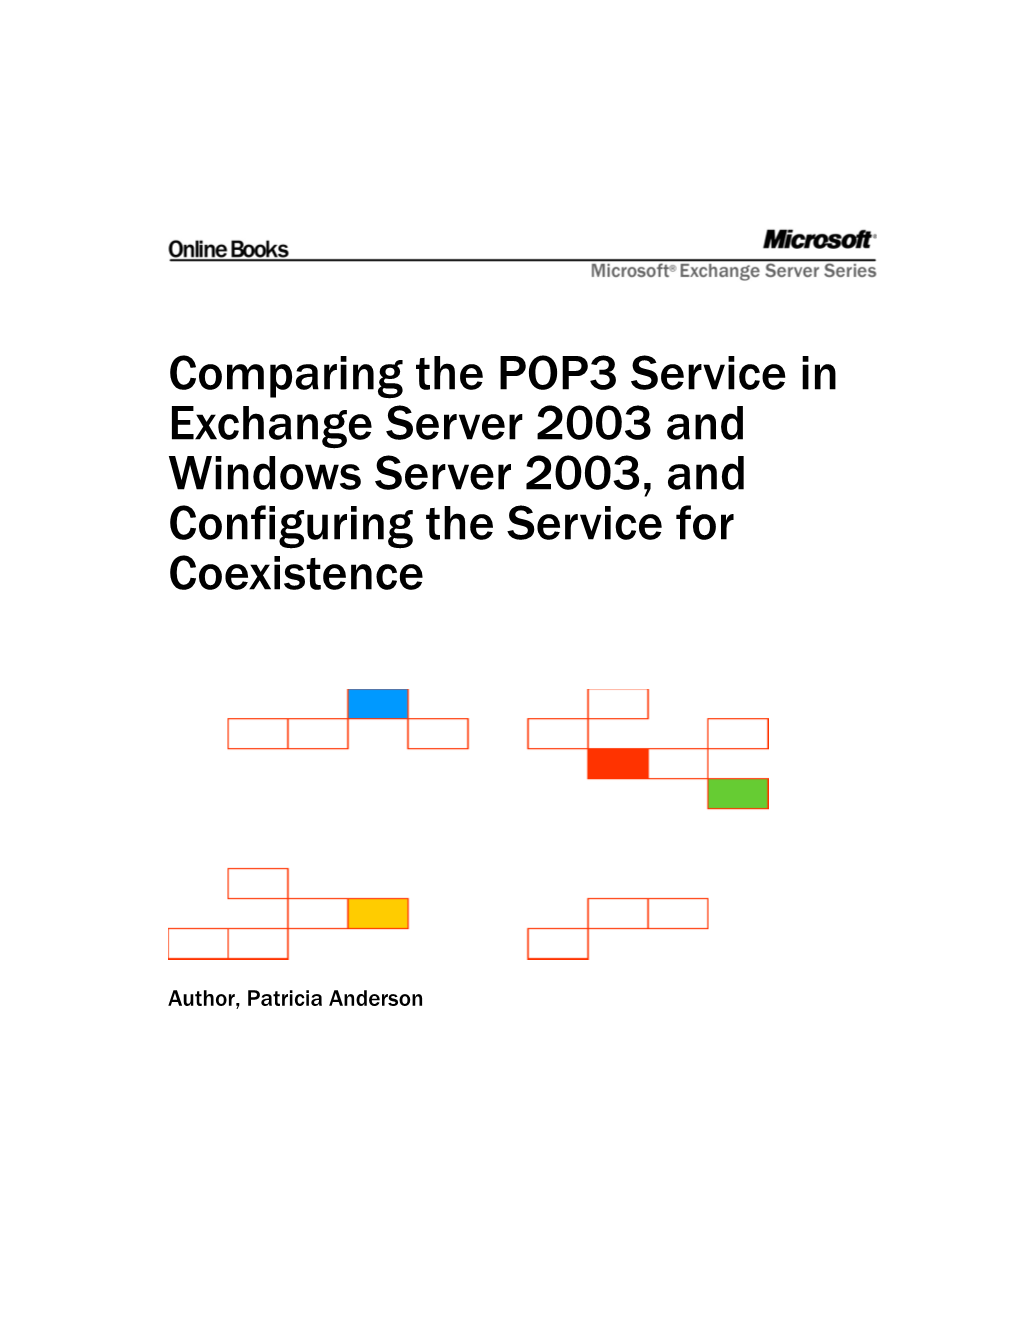 Comparing and Configuring the POP3 Service